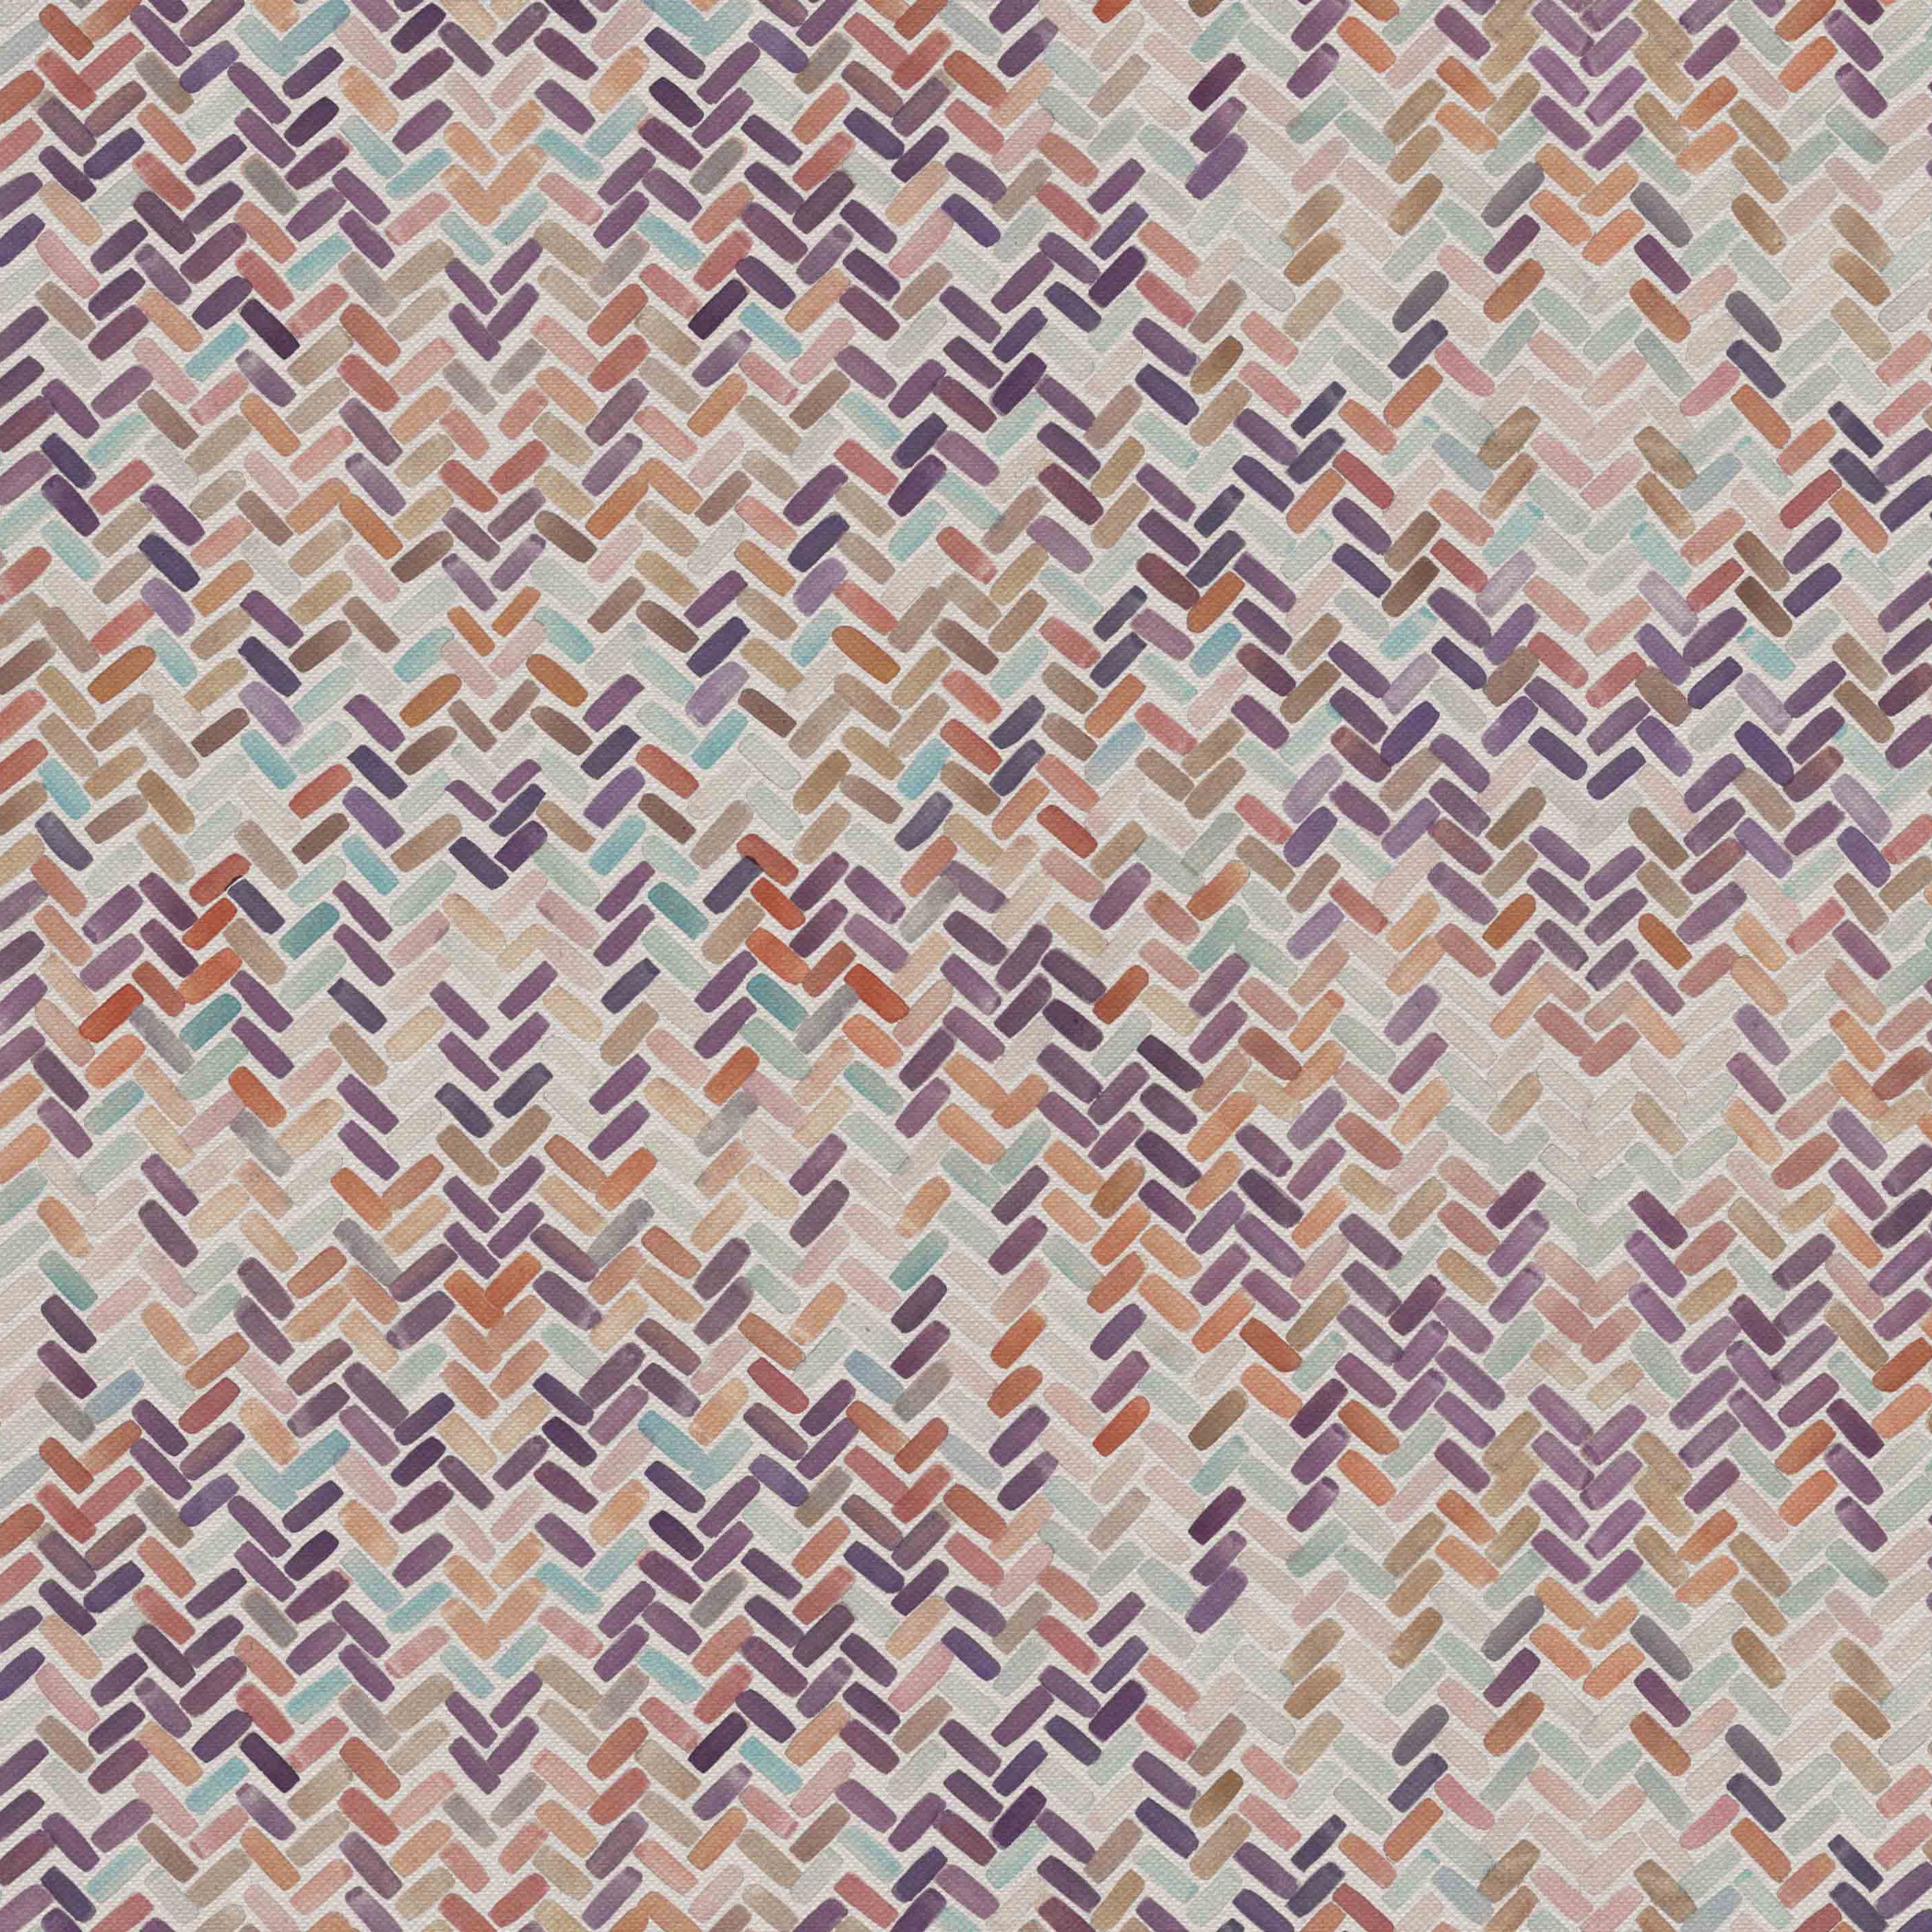 Detail of fabric in a thatched herringbone pattern in shades of pink, purple, blue and tan.